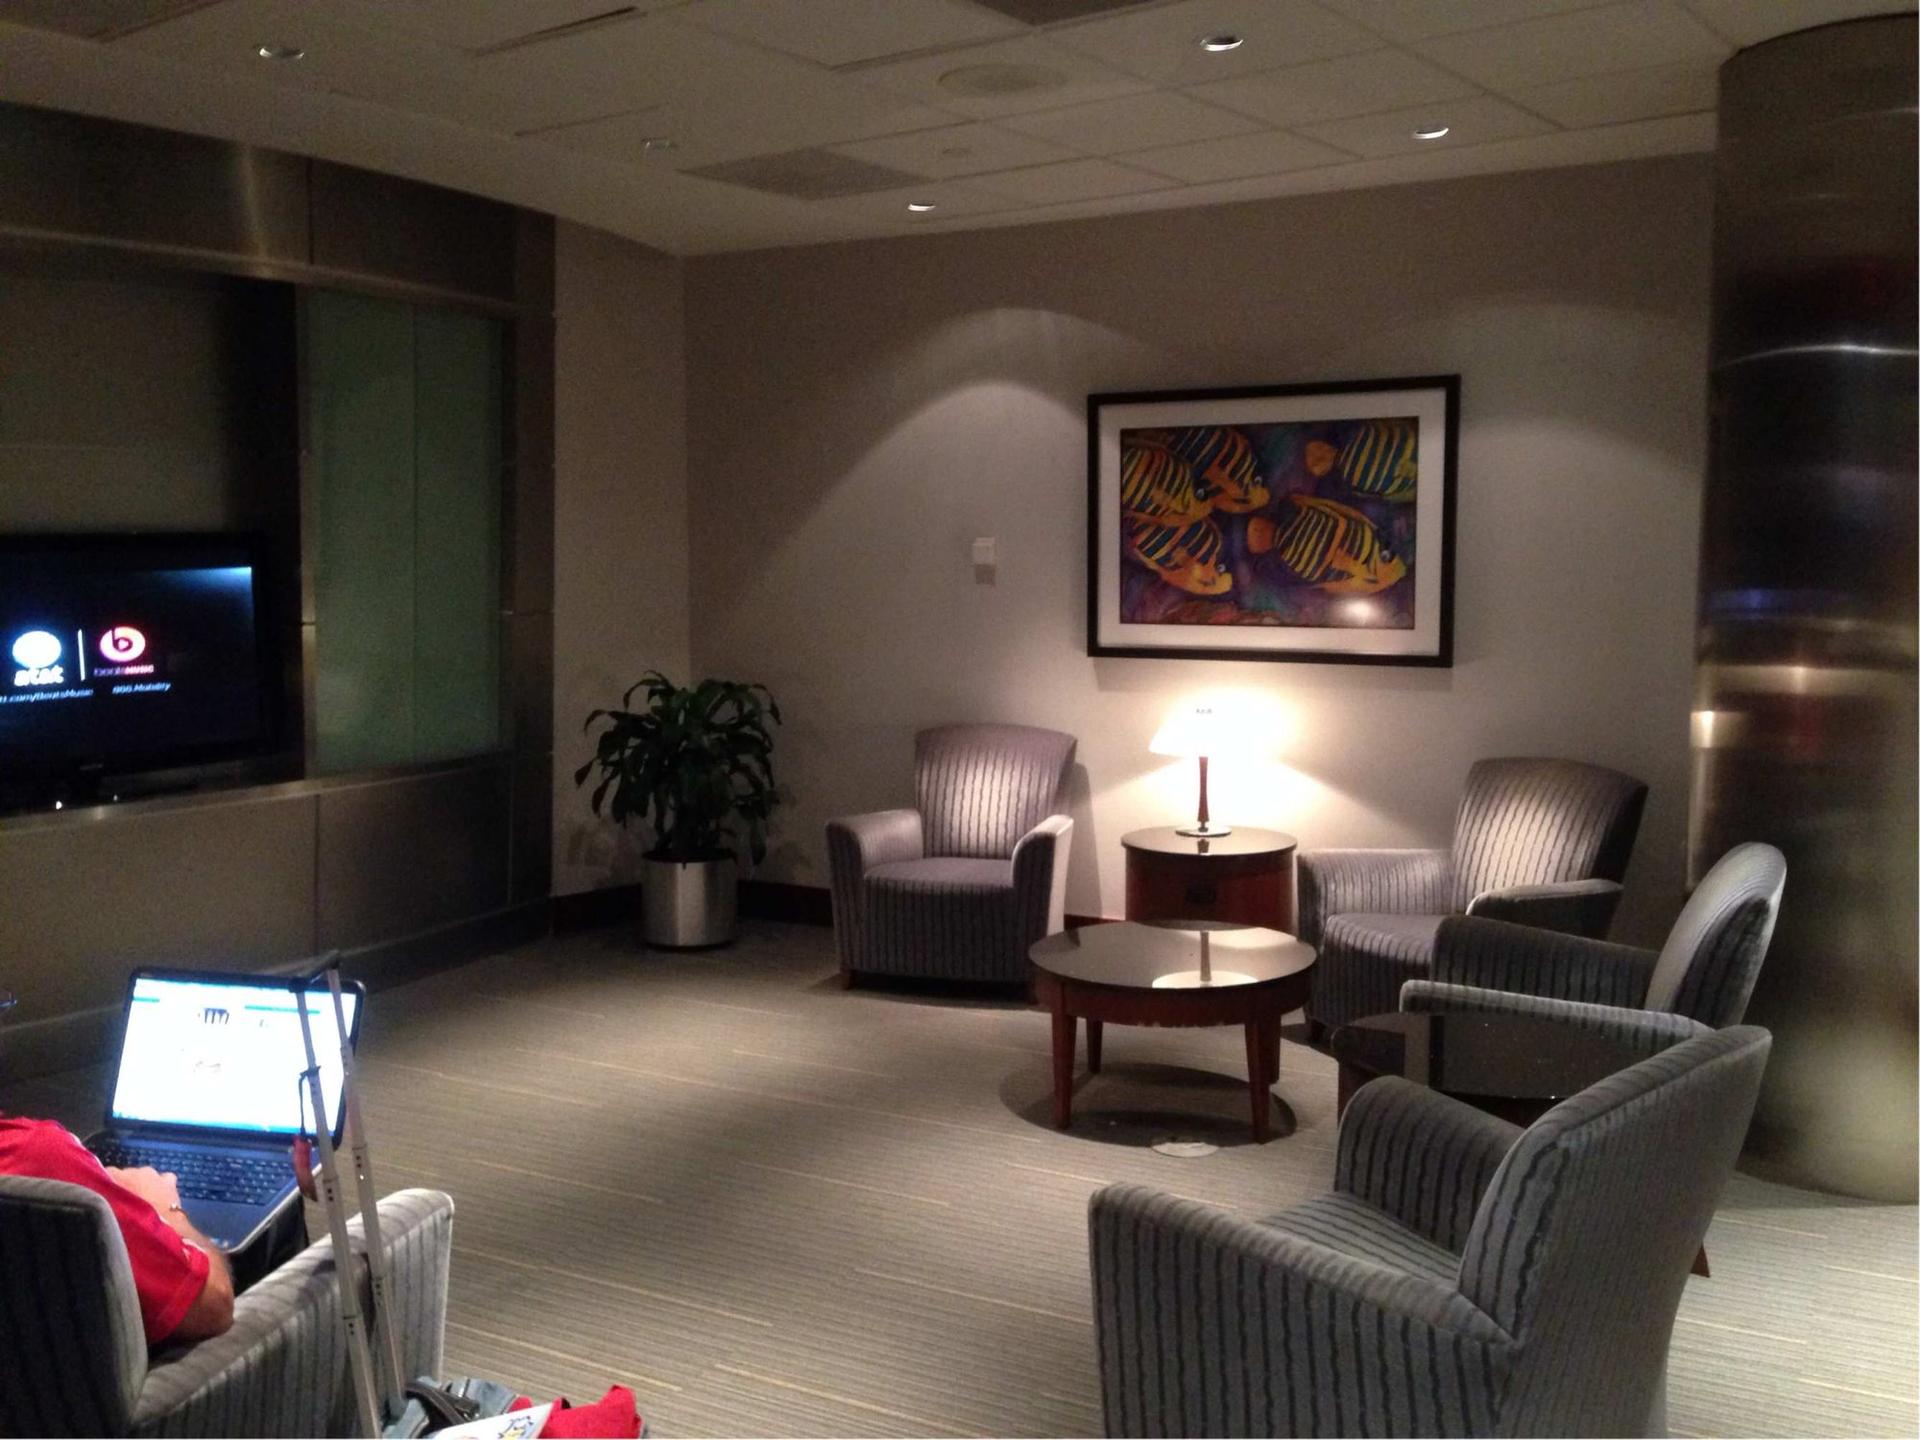 American Airlines Admirals Club image 10 of 20